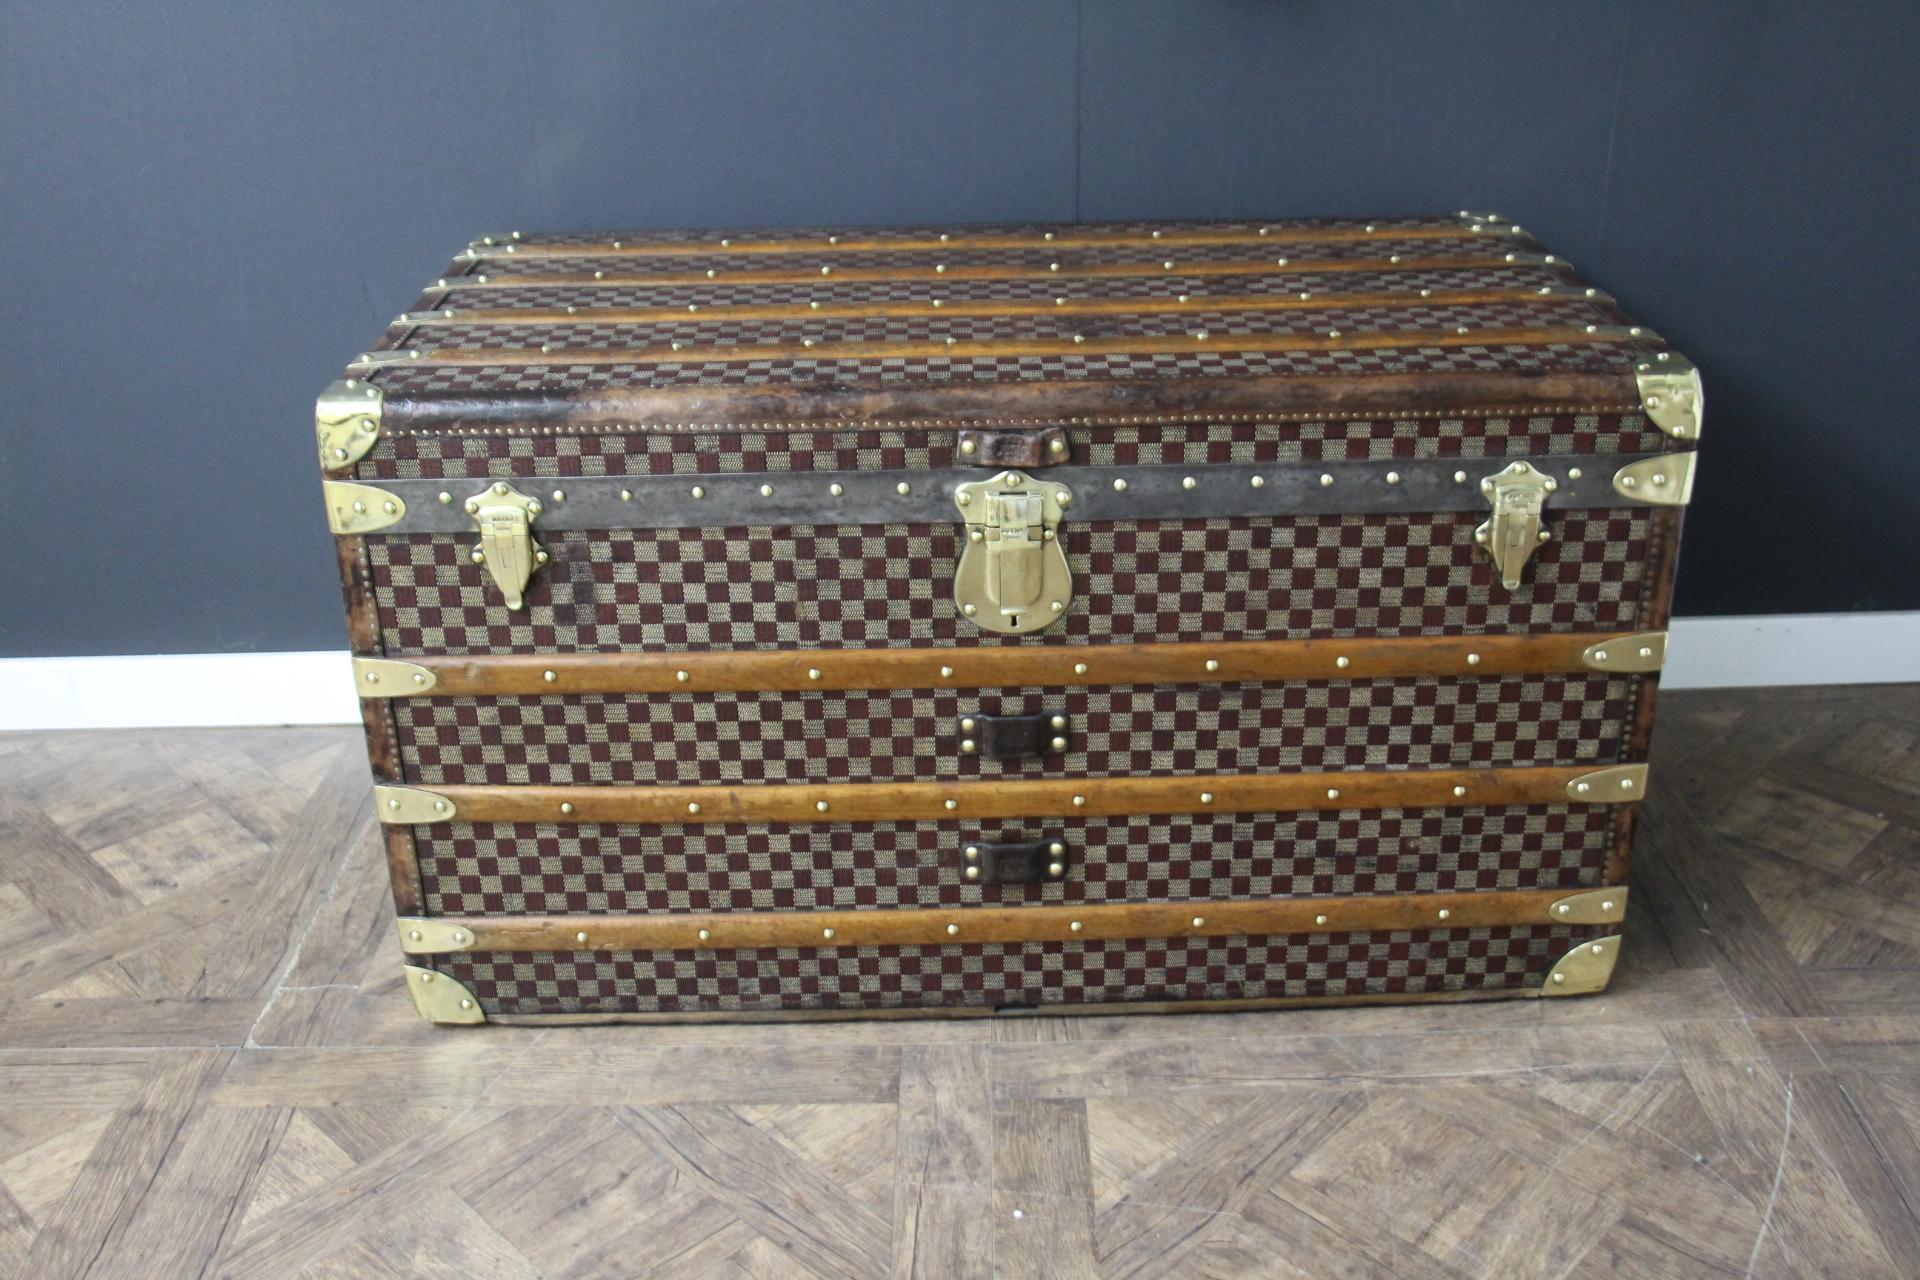 This beautiful and very rare Moynat trunk features beautiful checkers canvas, chocolate color leather trim, large leather side handles with stamped Moynat flanges and solid brass stamped Moynat lock and clasps. Its patina is magnificent. Moreover it